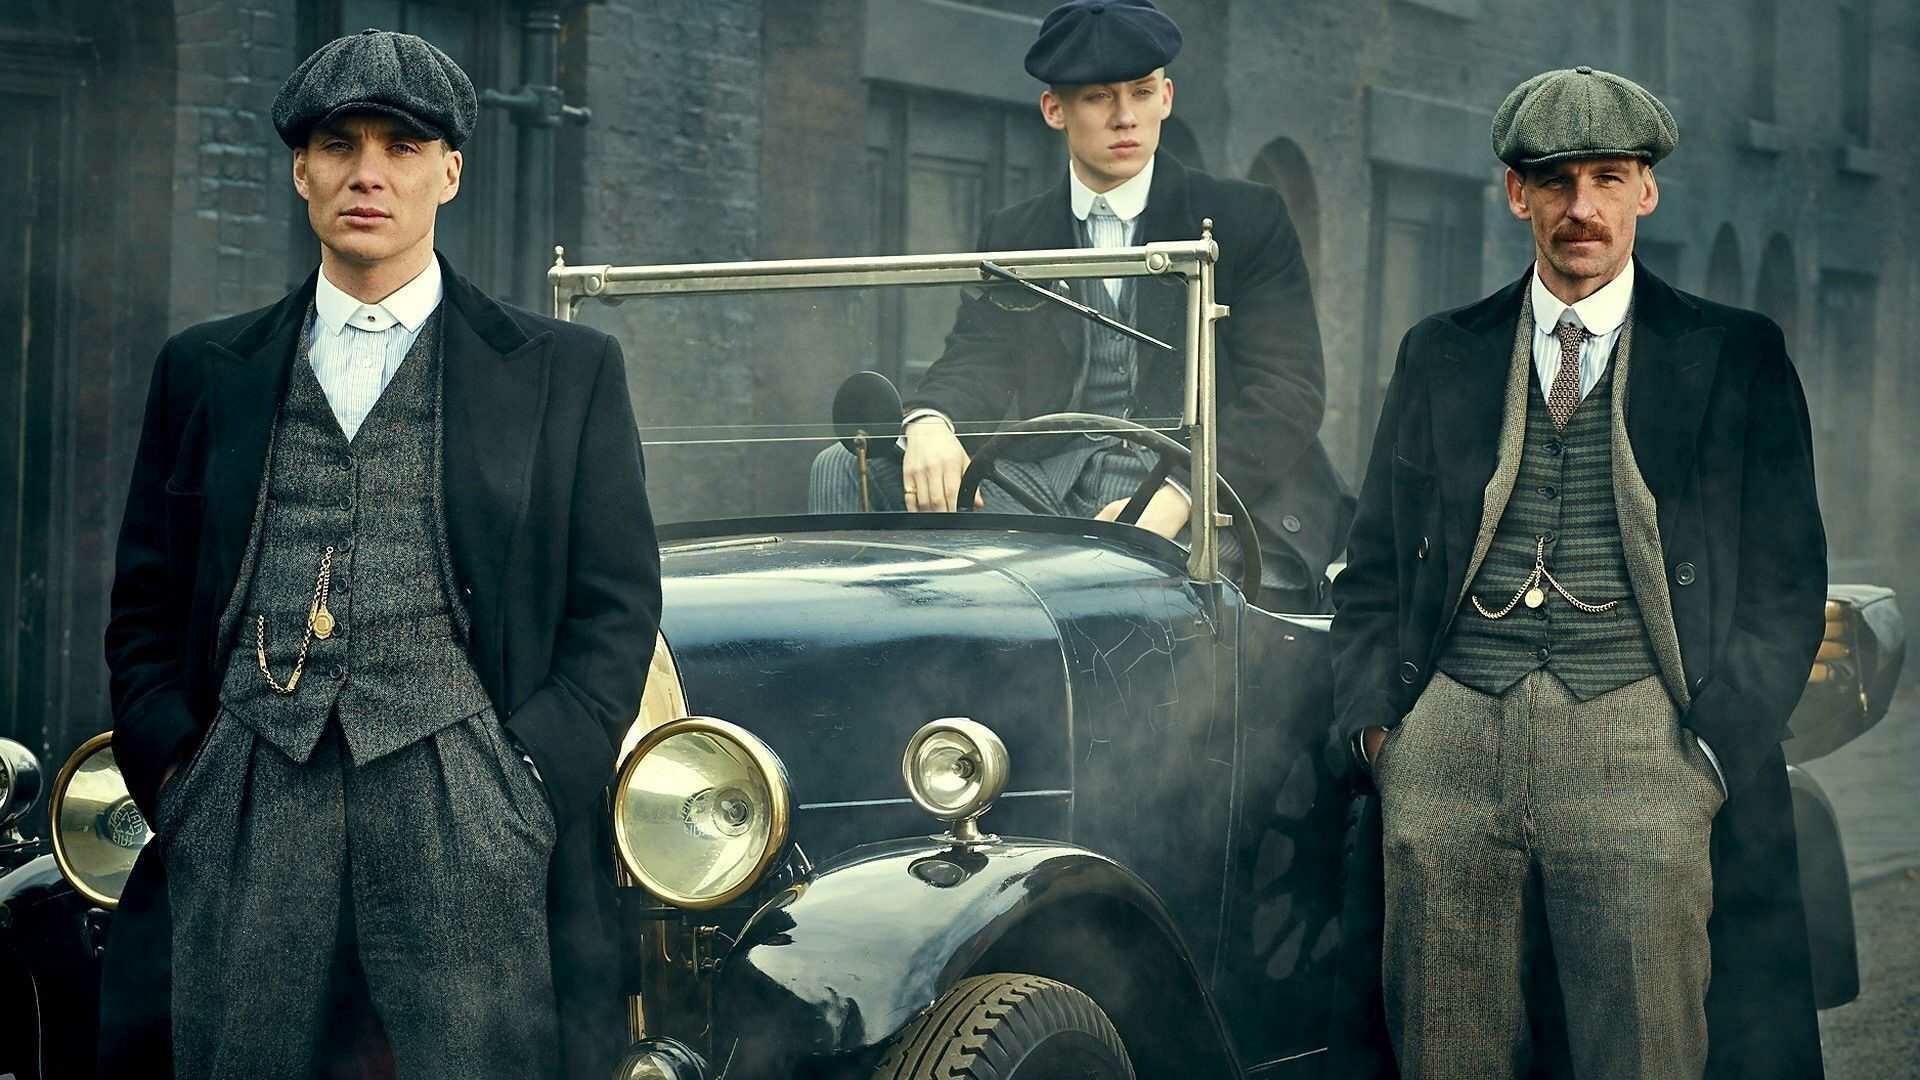 Peaky Blinders: A family from Birmingham running a feared crime ring, making money from illegal betting, protection, and the black market. 1920x1080 Full HD Background.